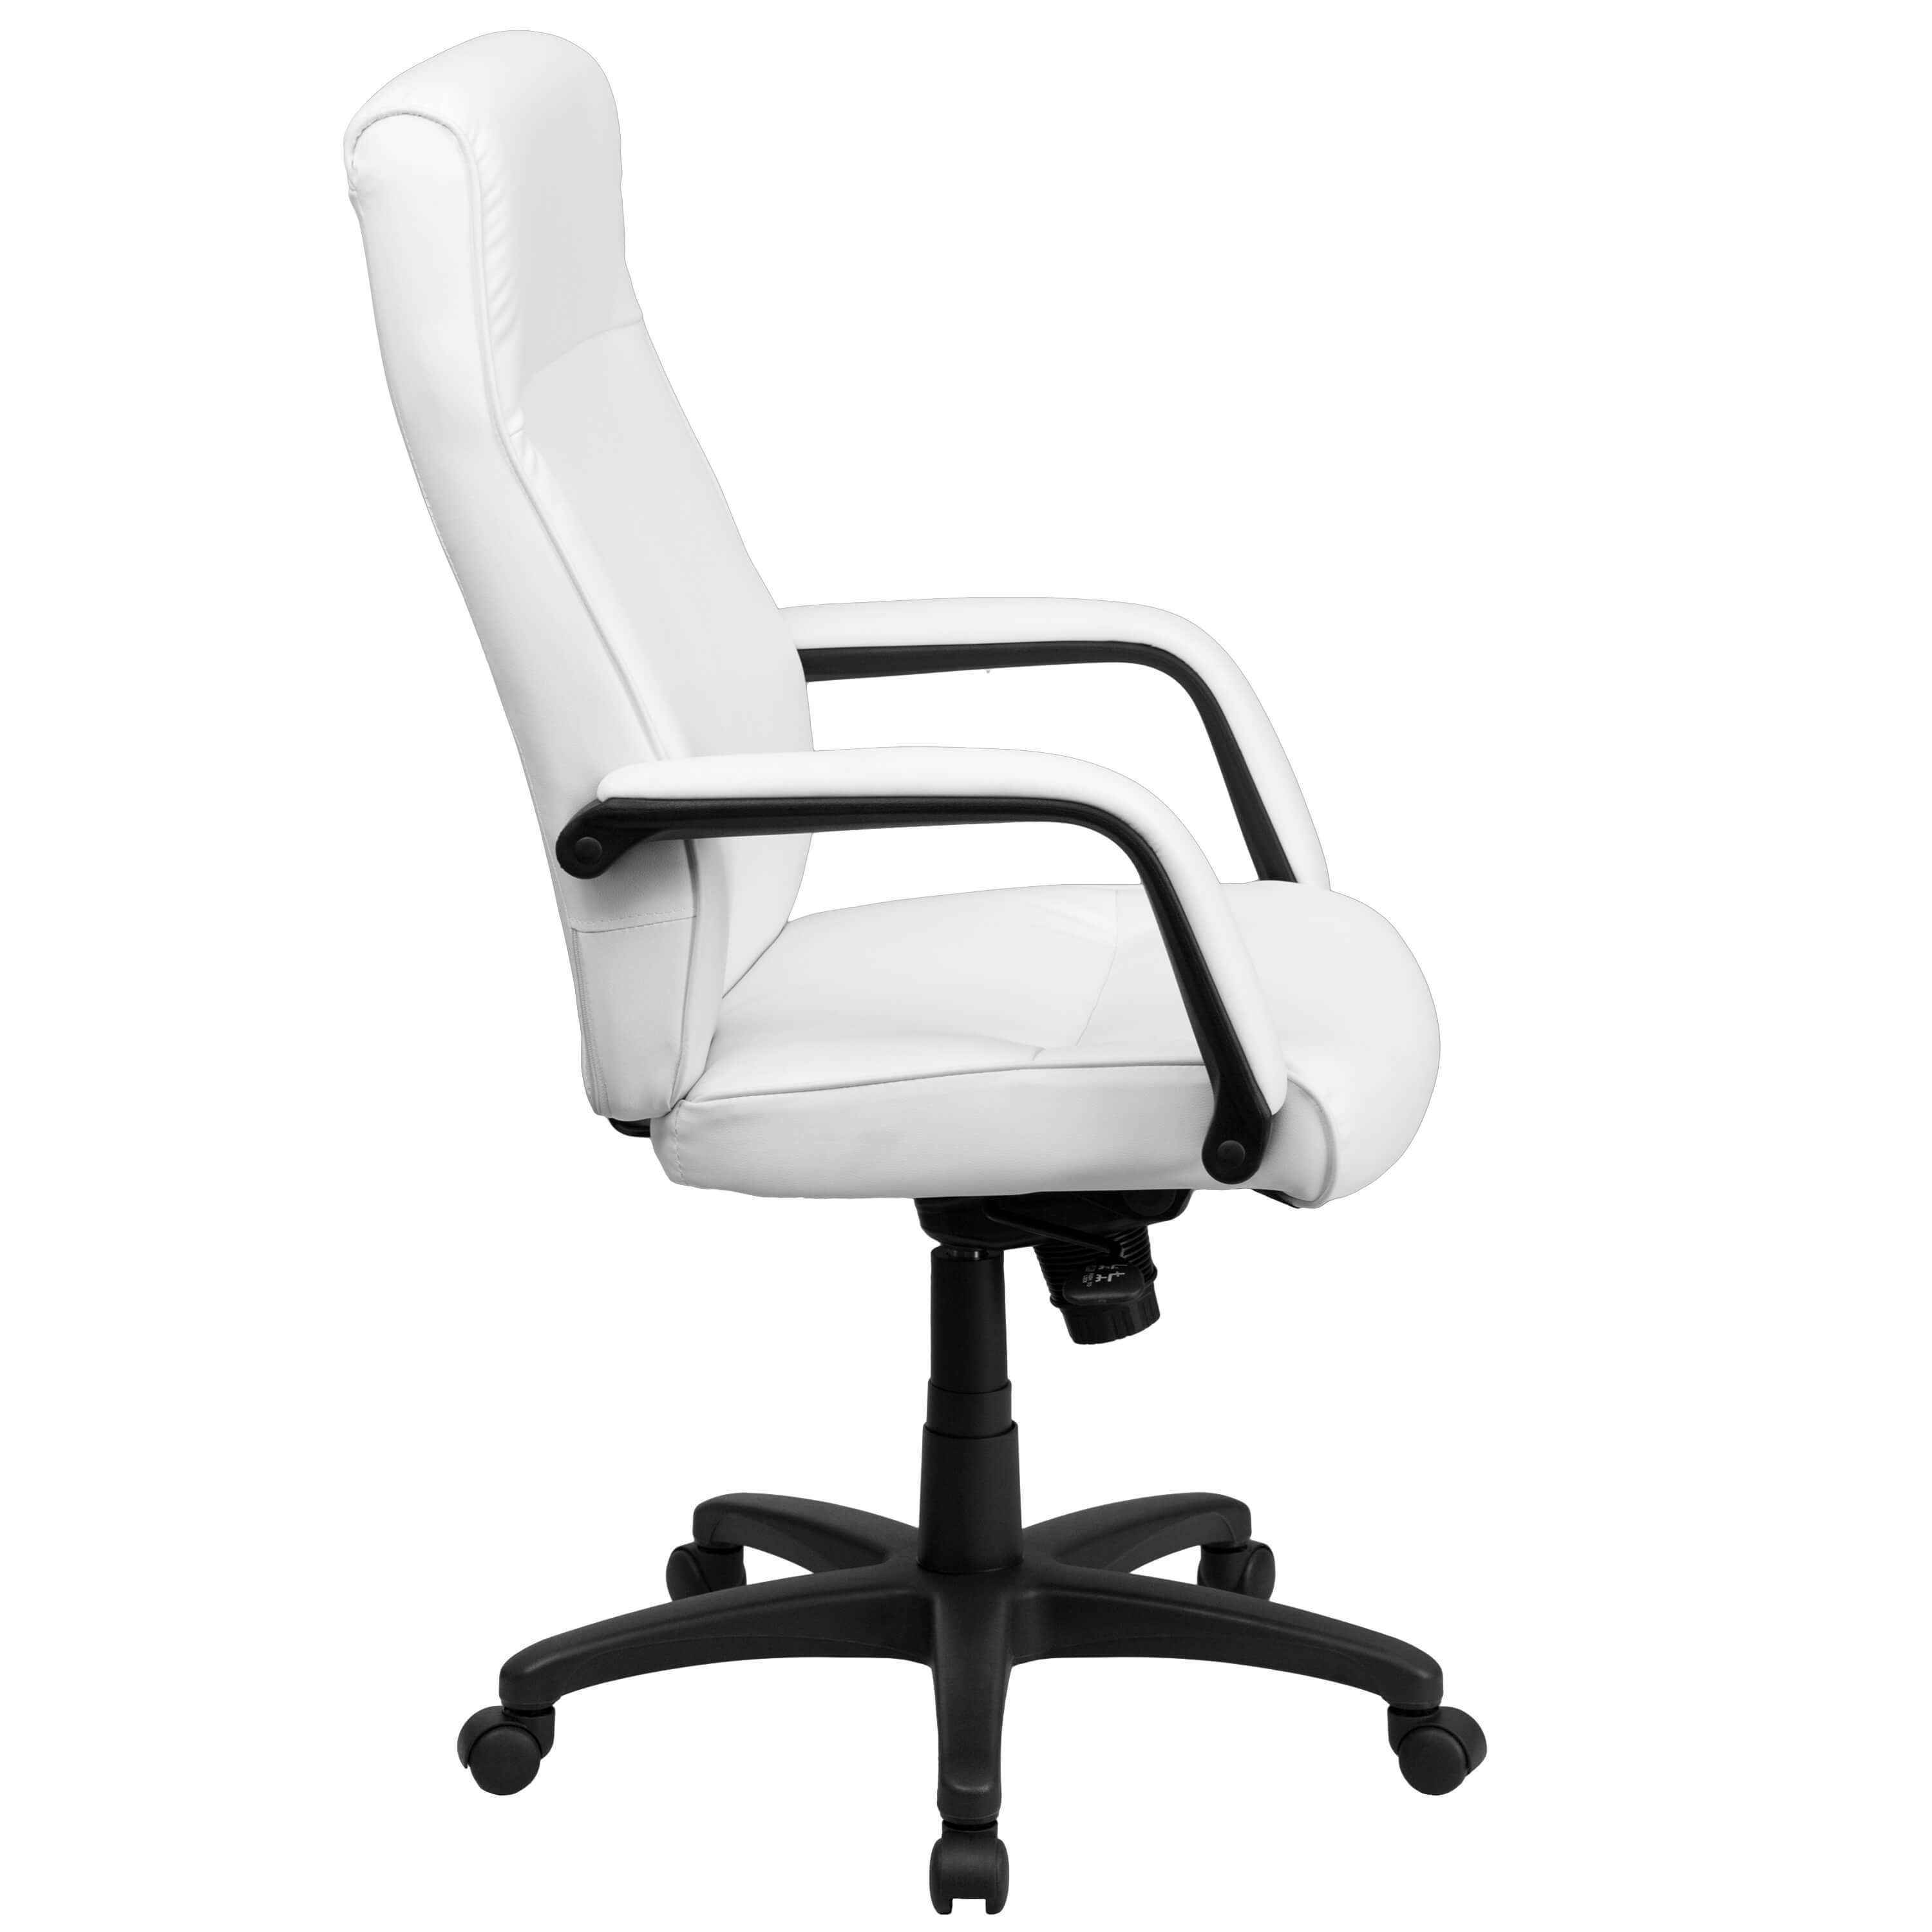 High back office chair side view